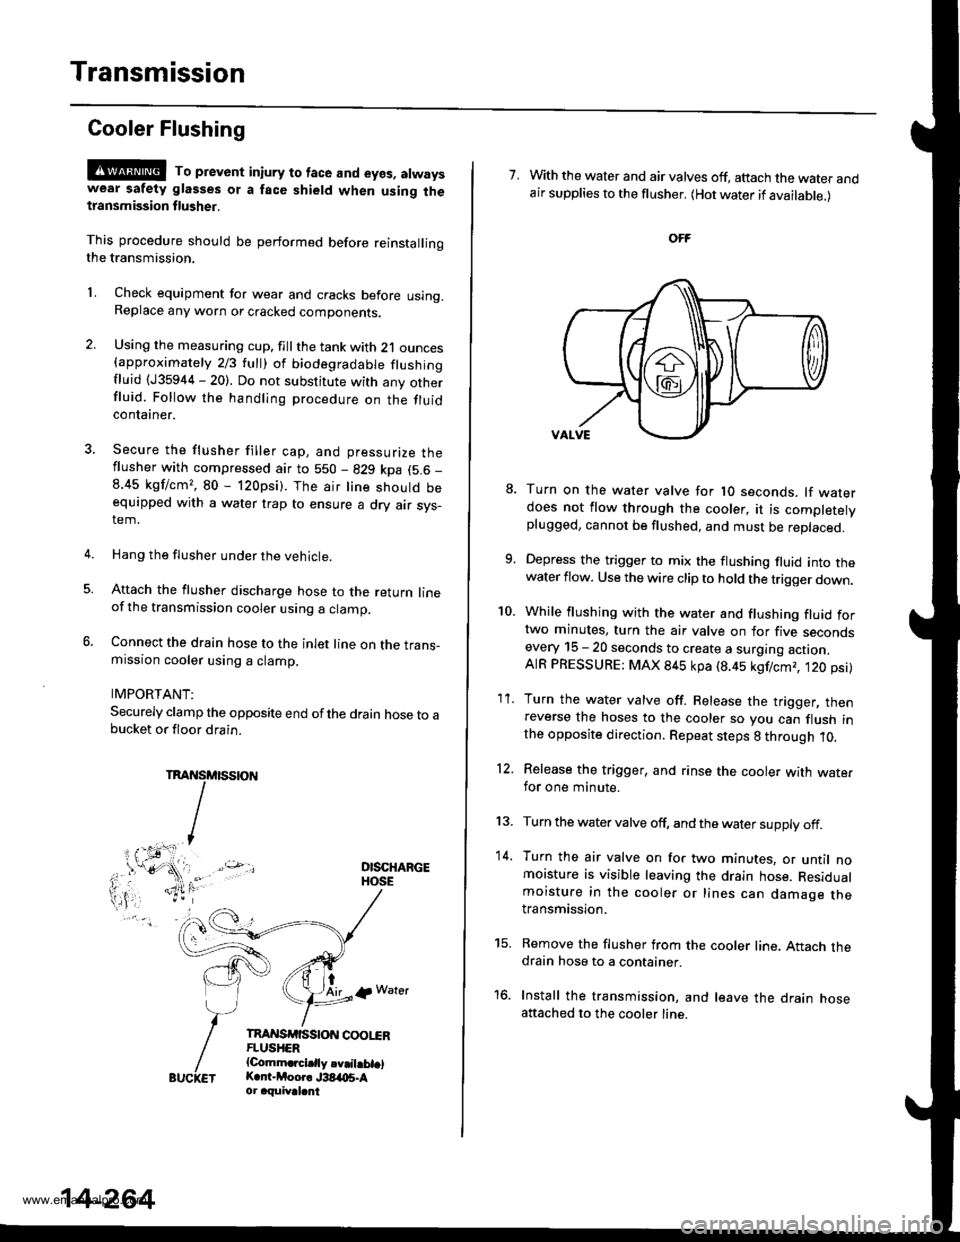 HONDA CR-V 1998 RD1-RD3 / 1.G Service Manual 
Transmission
Cooler Flushing
@@ To prevent in;ury to face and eyos, atwayswear safety glasses ot a face shield when using thetlansmission flusher.
This procedure should be performed before reinstalli